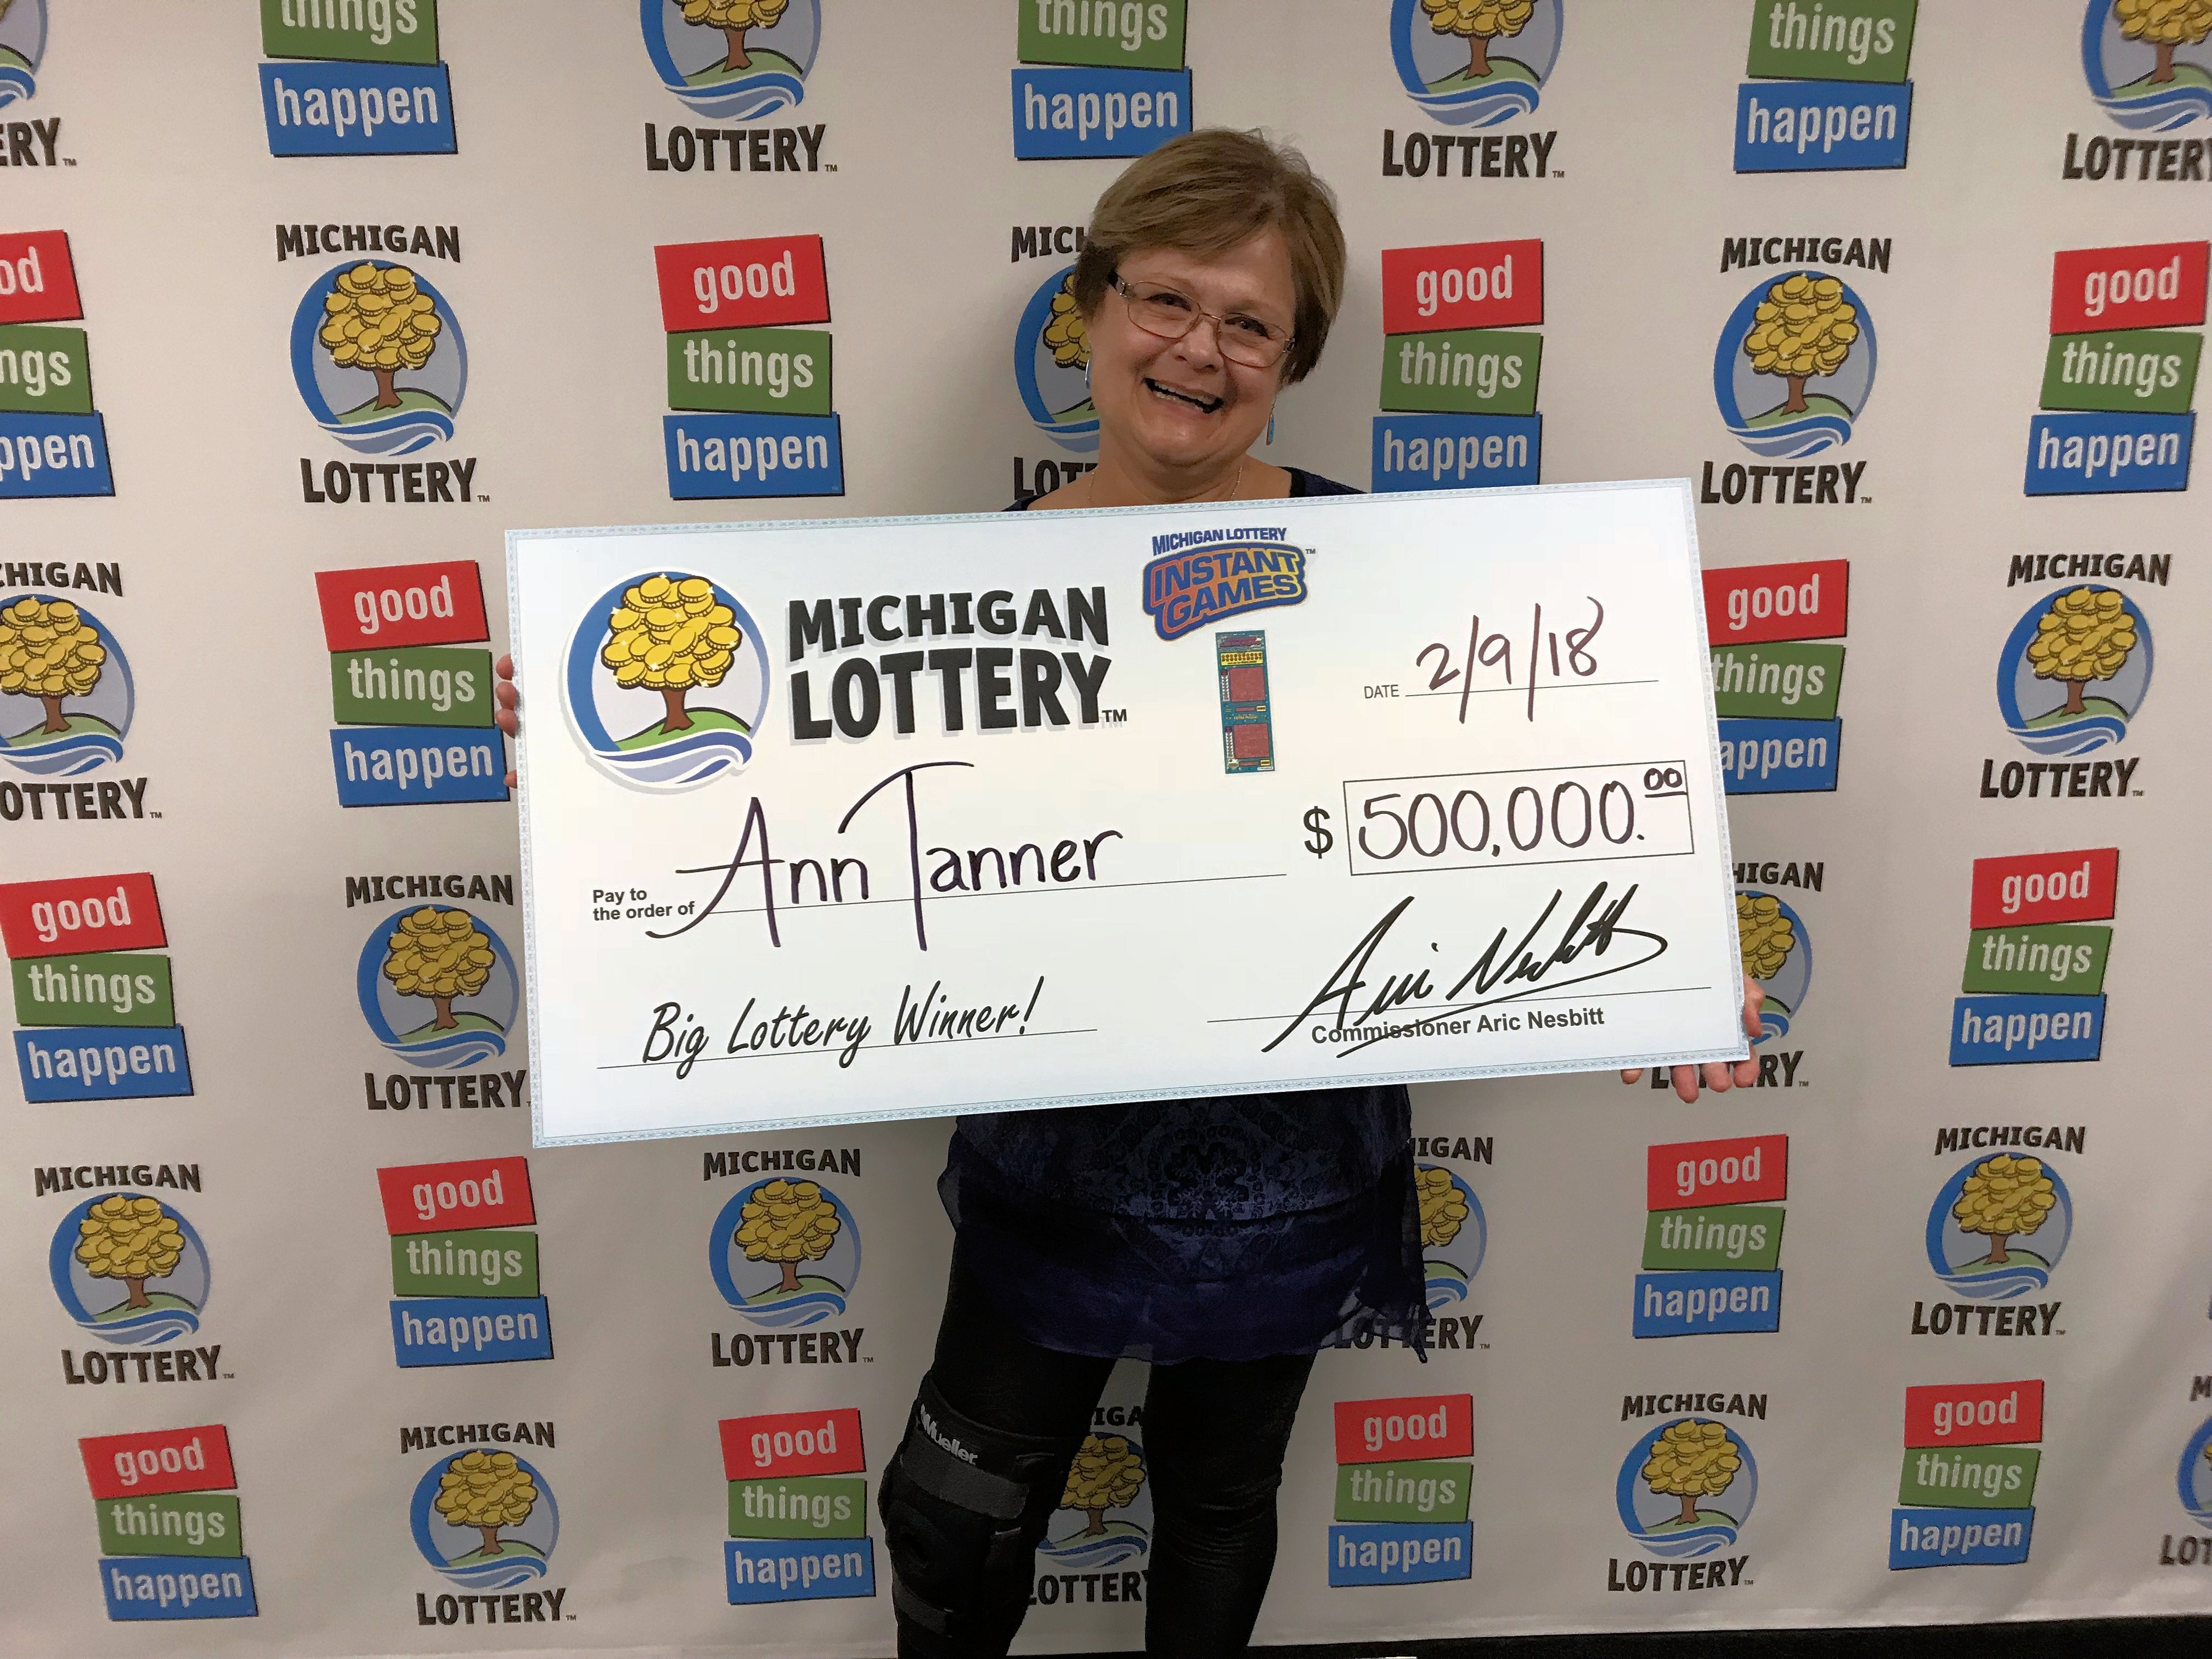 Oceana County Woman Wins 500,000 Playing the Michigan Lottery’s Triple